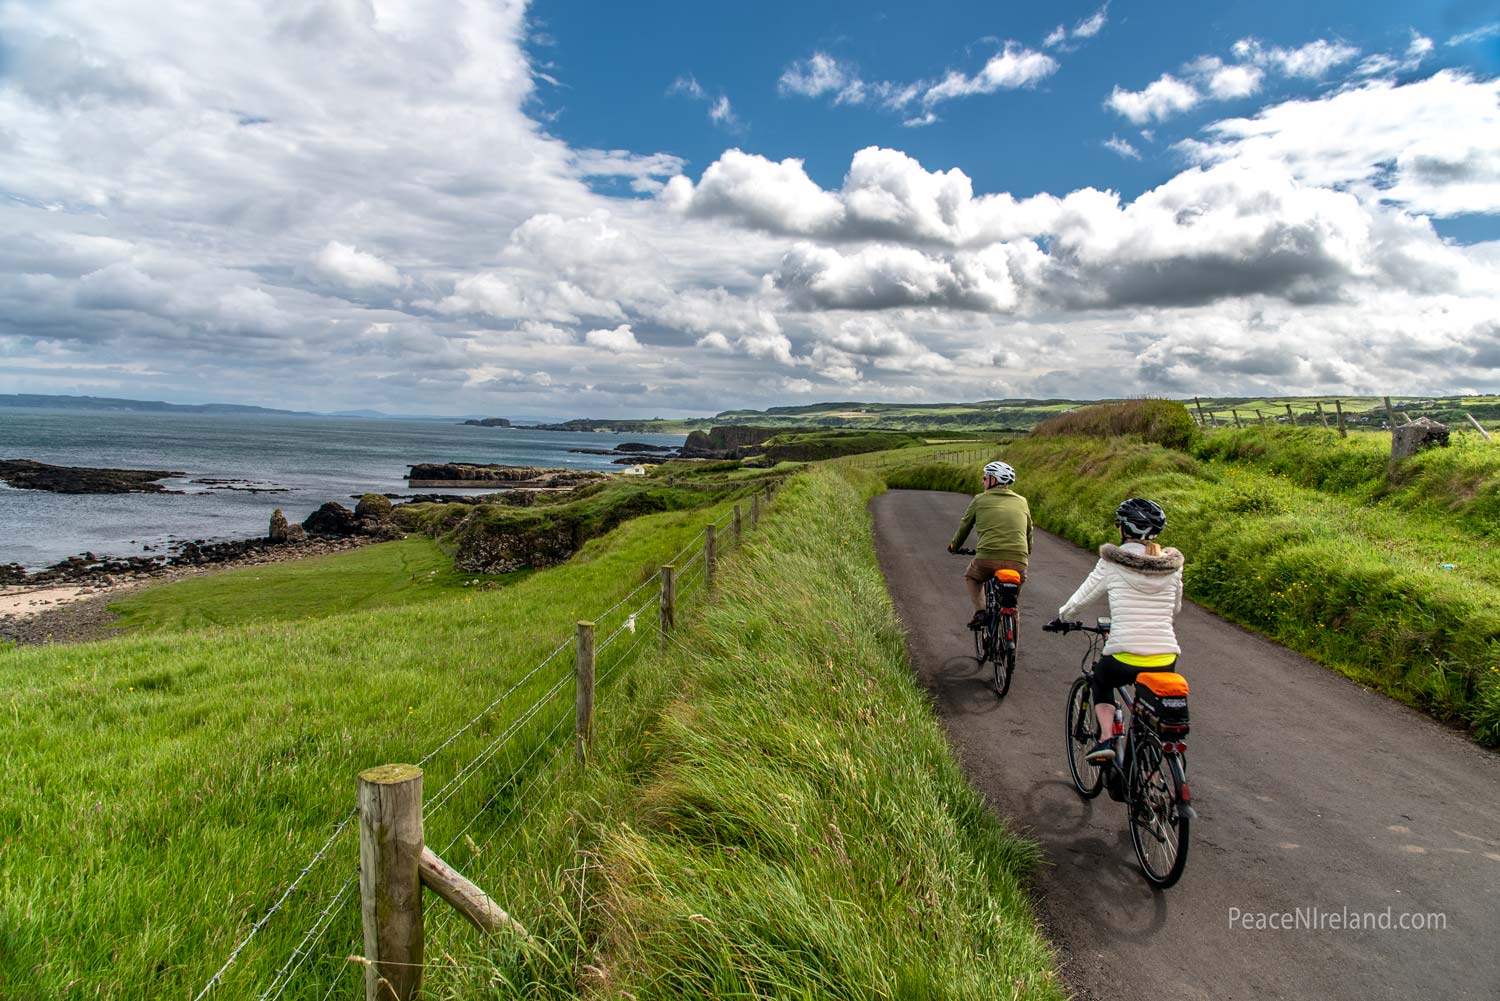 A couple enjoy the scenery on the North Coast, County Antrim, Northern Ireland